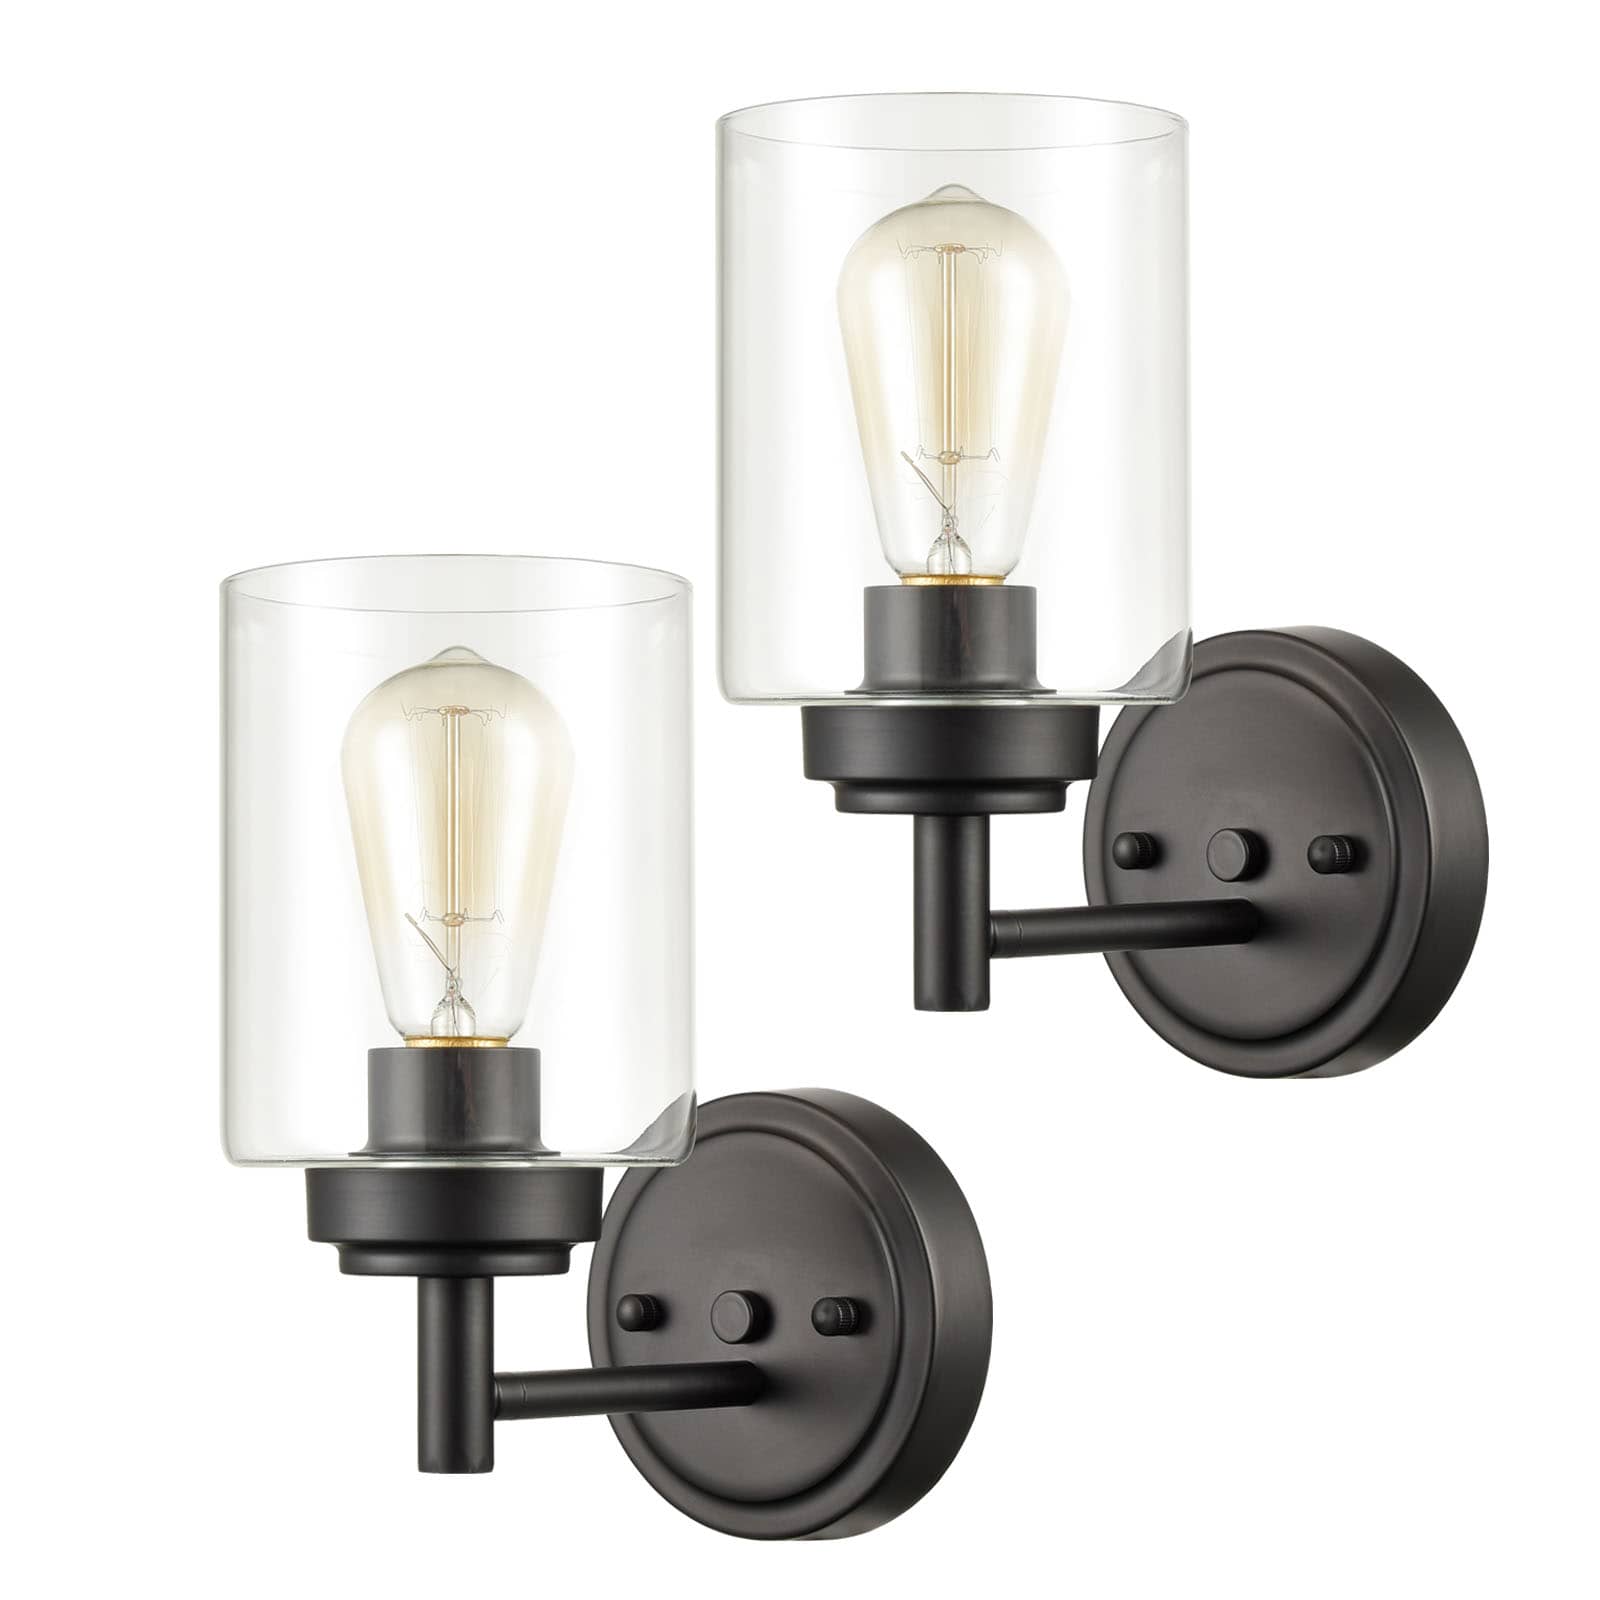 Set of 2 Modern Black Metal Wall Sconce with Cylindrical Clear Glass Shade for Bathroom